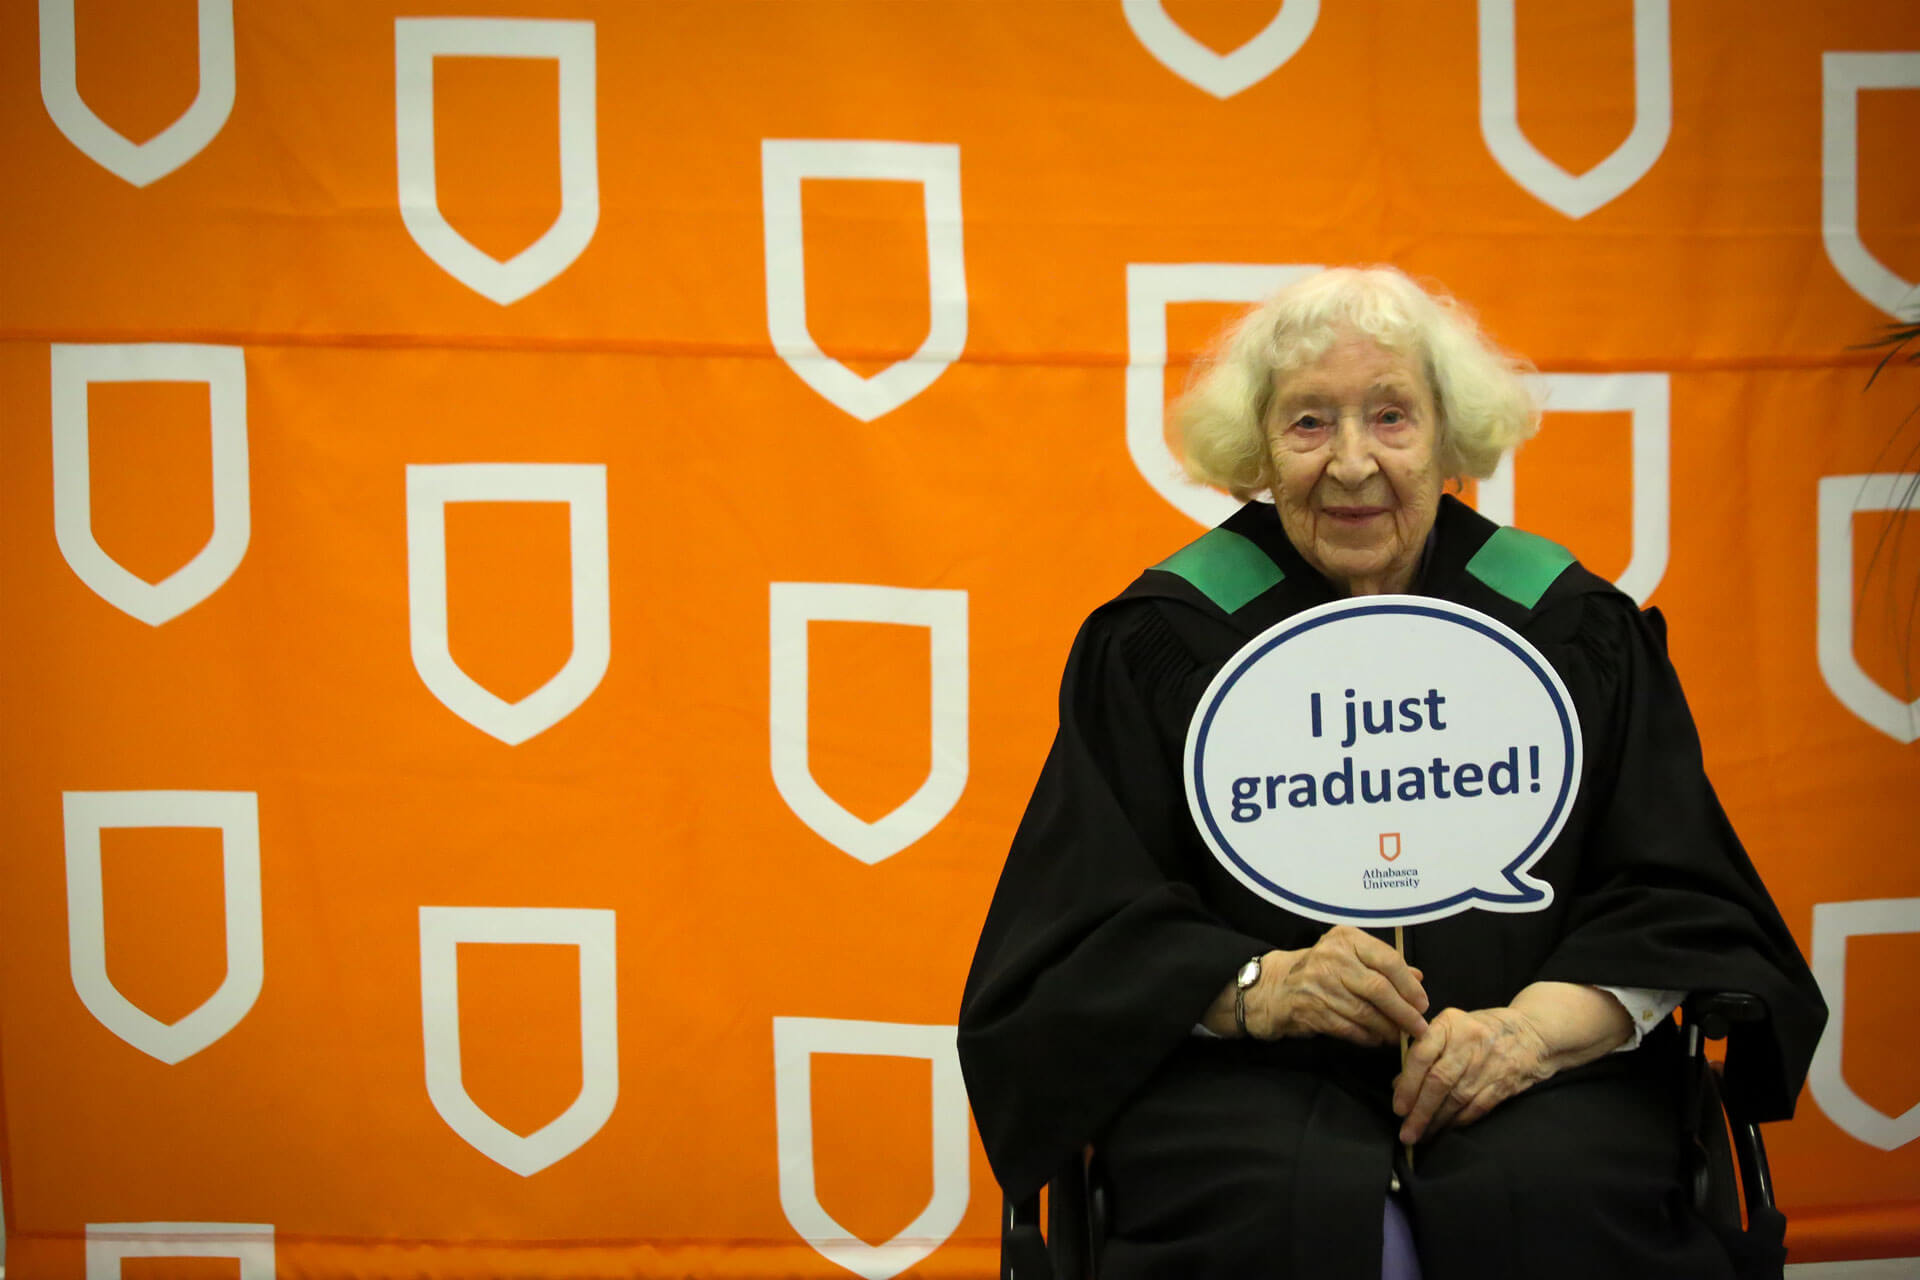 AU’s oldest-ever graduate, Louisa Daley, celebrates convocation and her Bachelor of General Studies in 2018 at the age of 93.